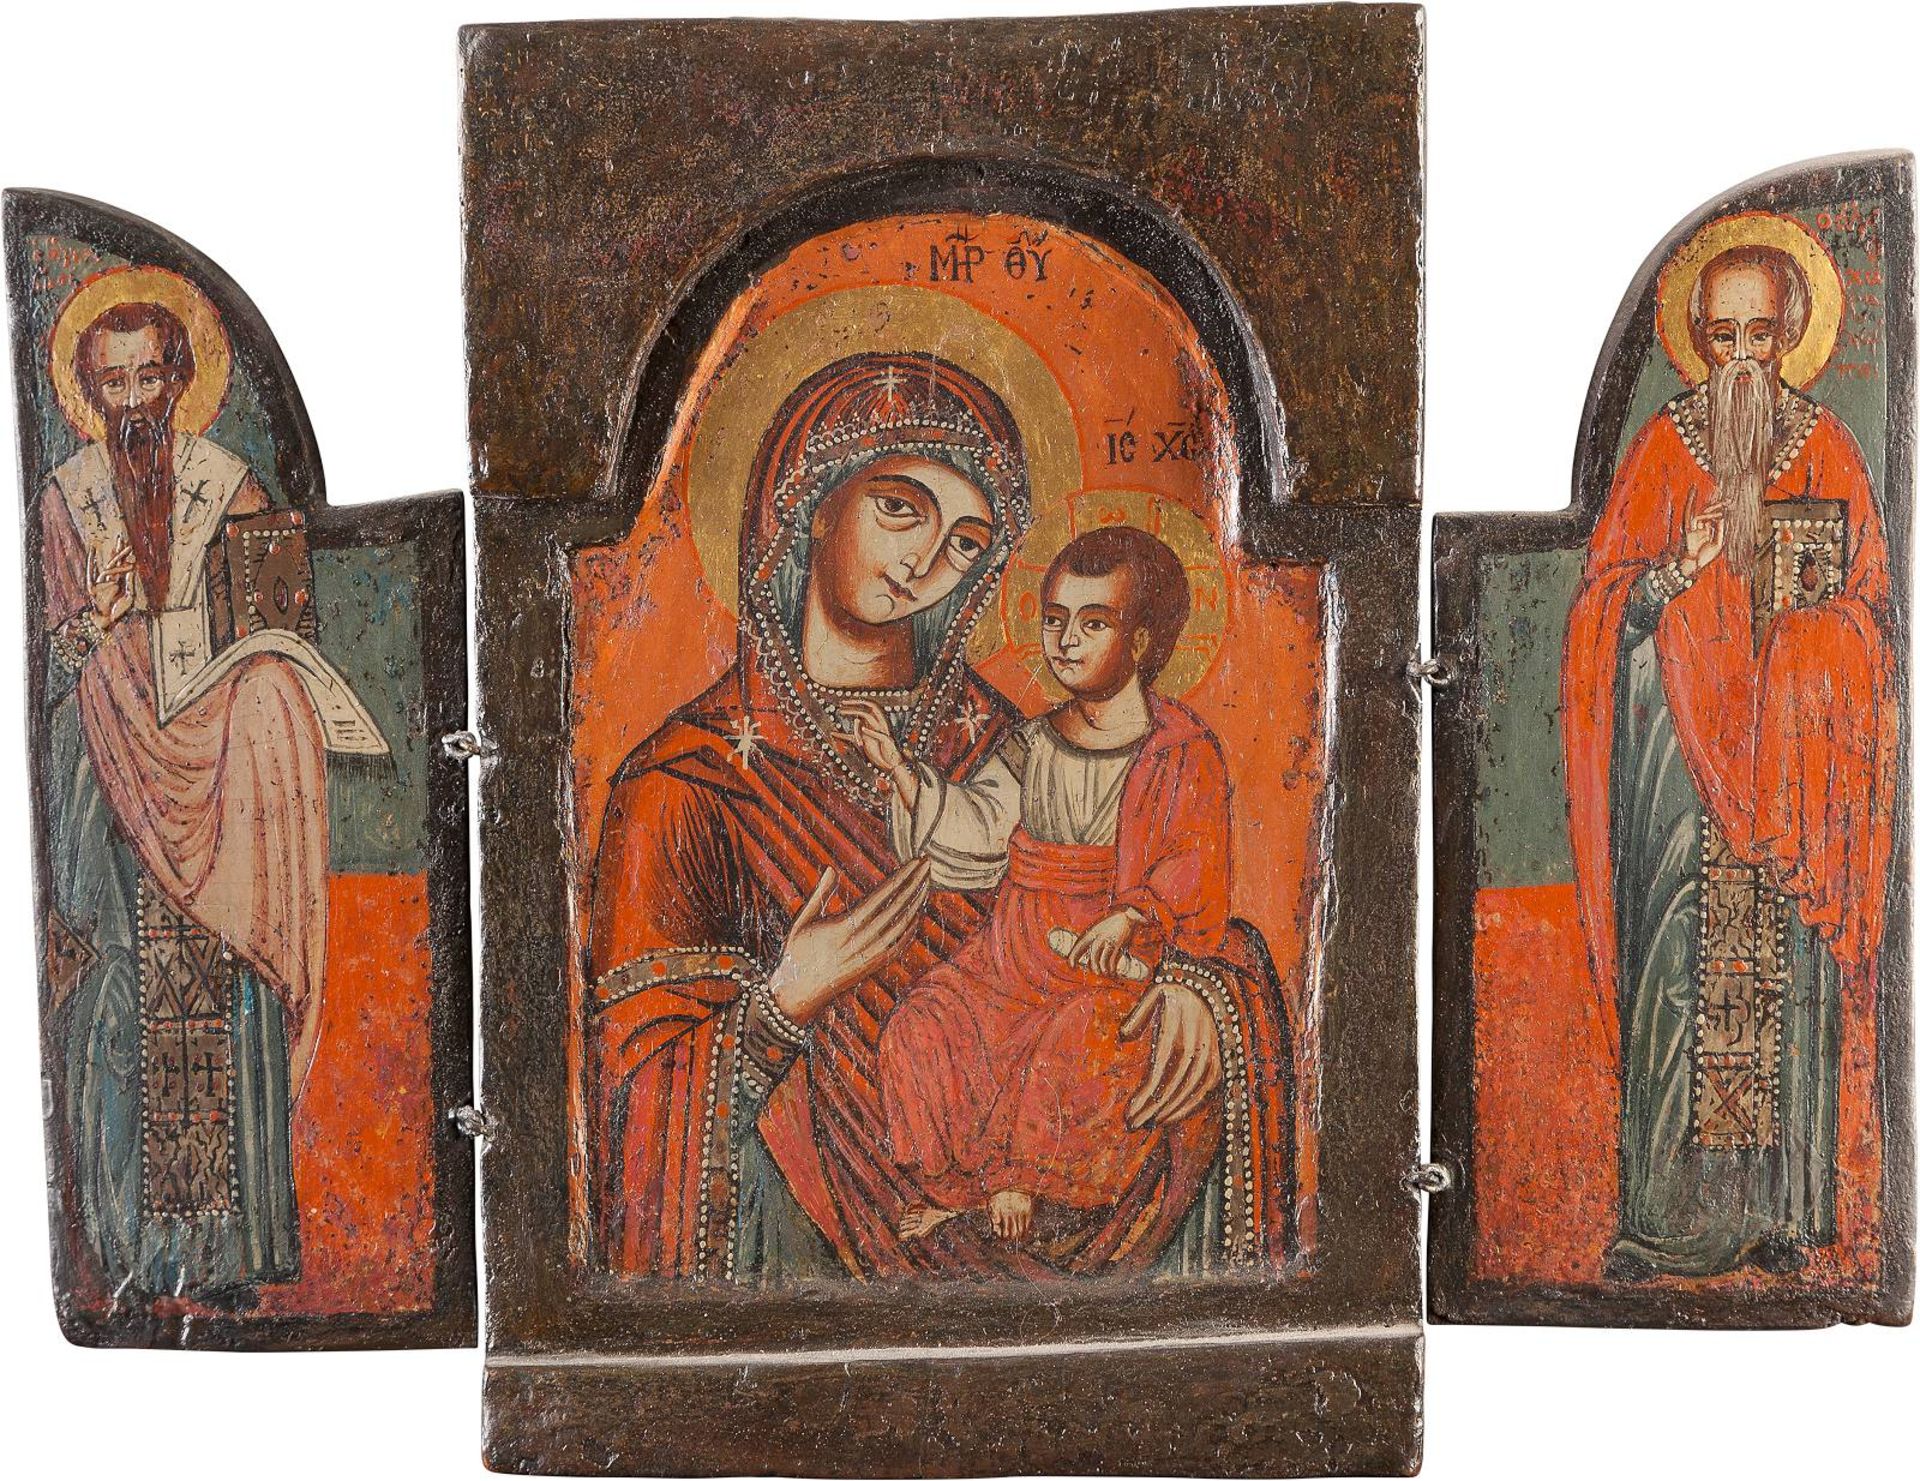 A SMALL TRIPTYCHGreek, 18th century Tempera on wood panels. The central panel depicting the Mother